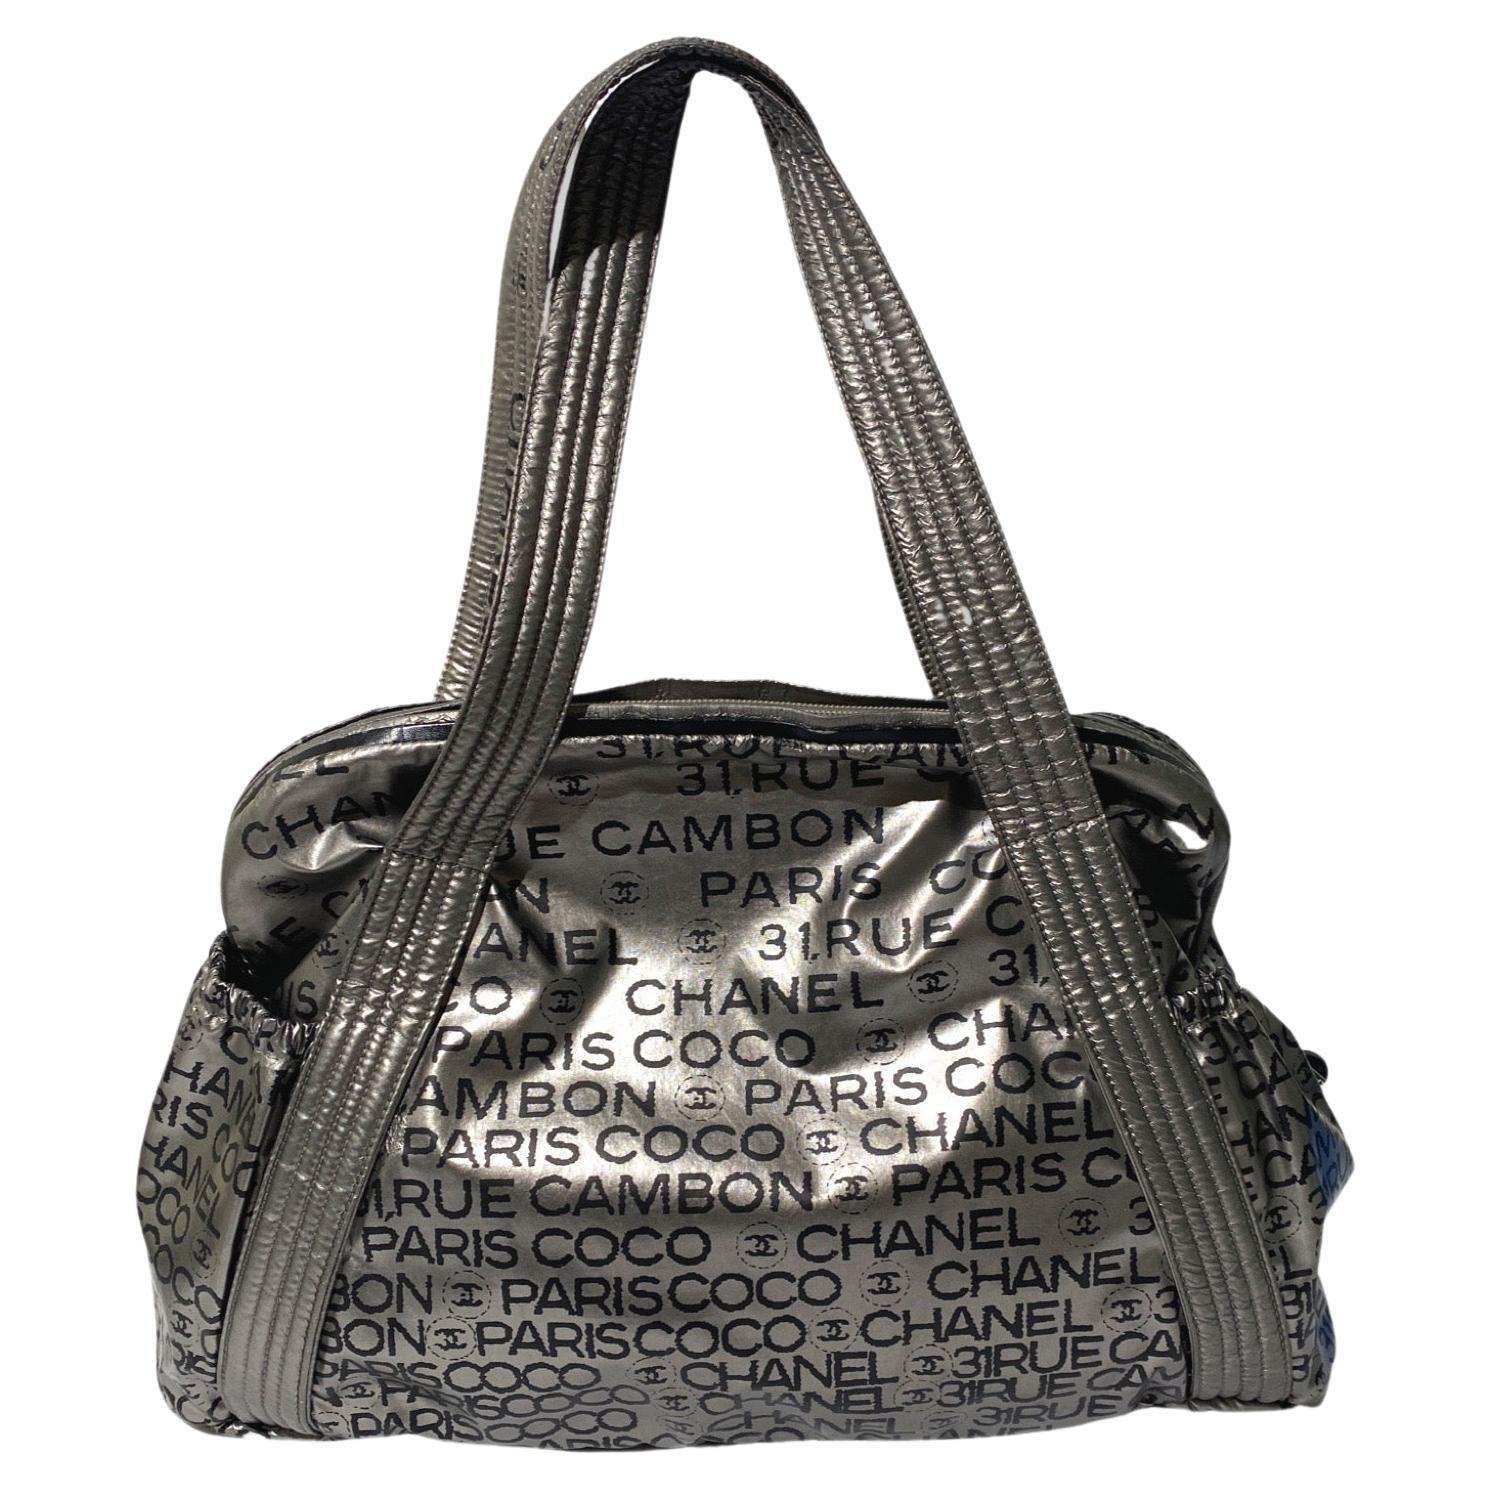 Chanel Rue Cambon Bag - 18 For Sale on 1stDibs